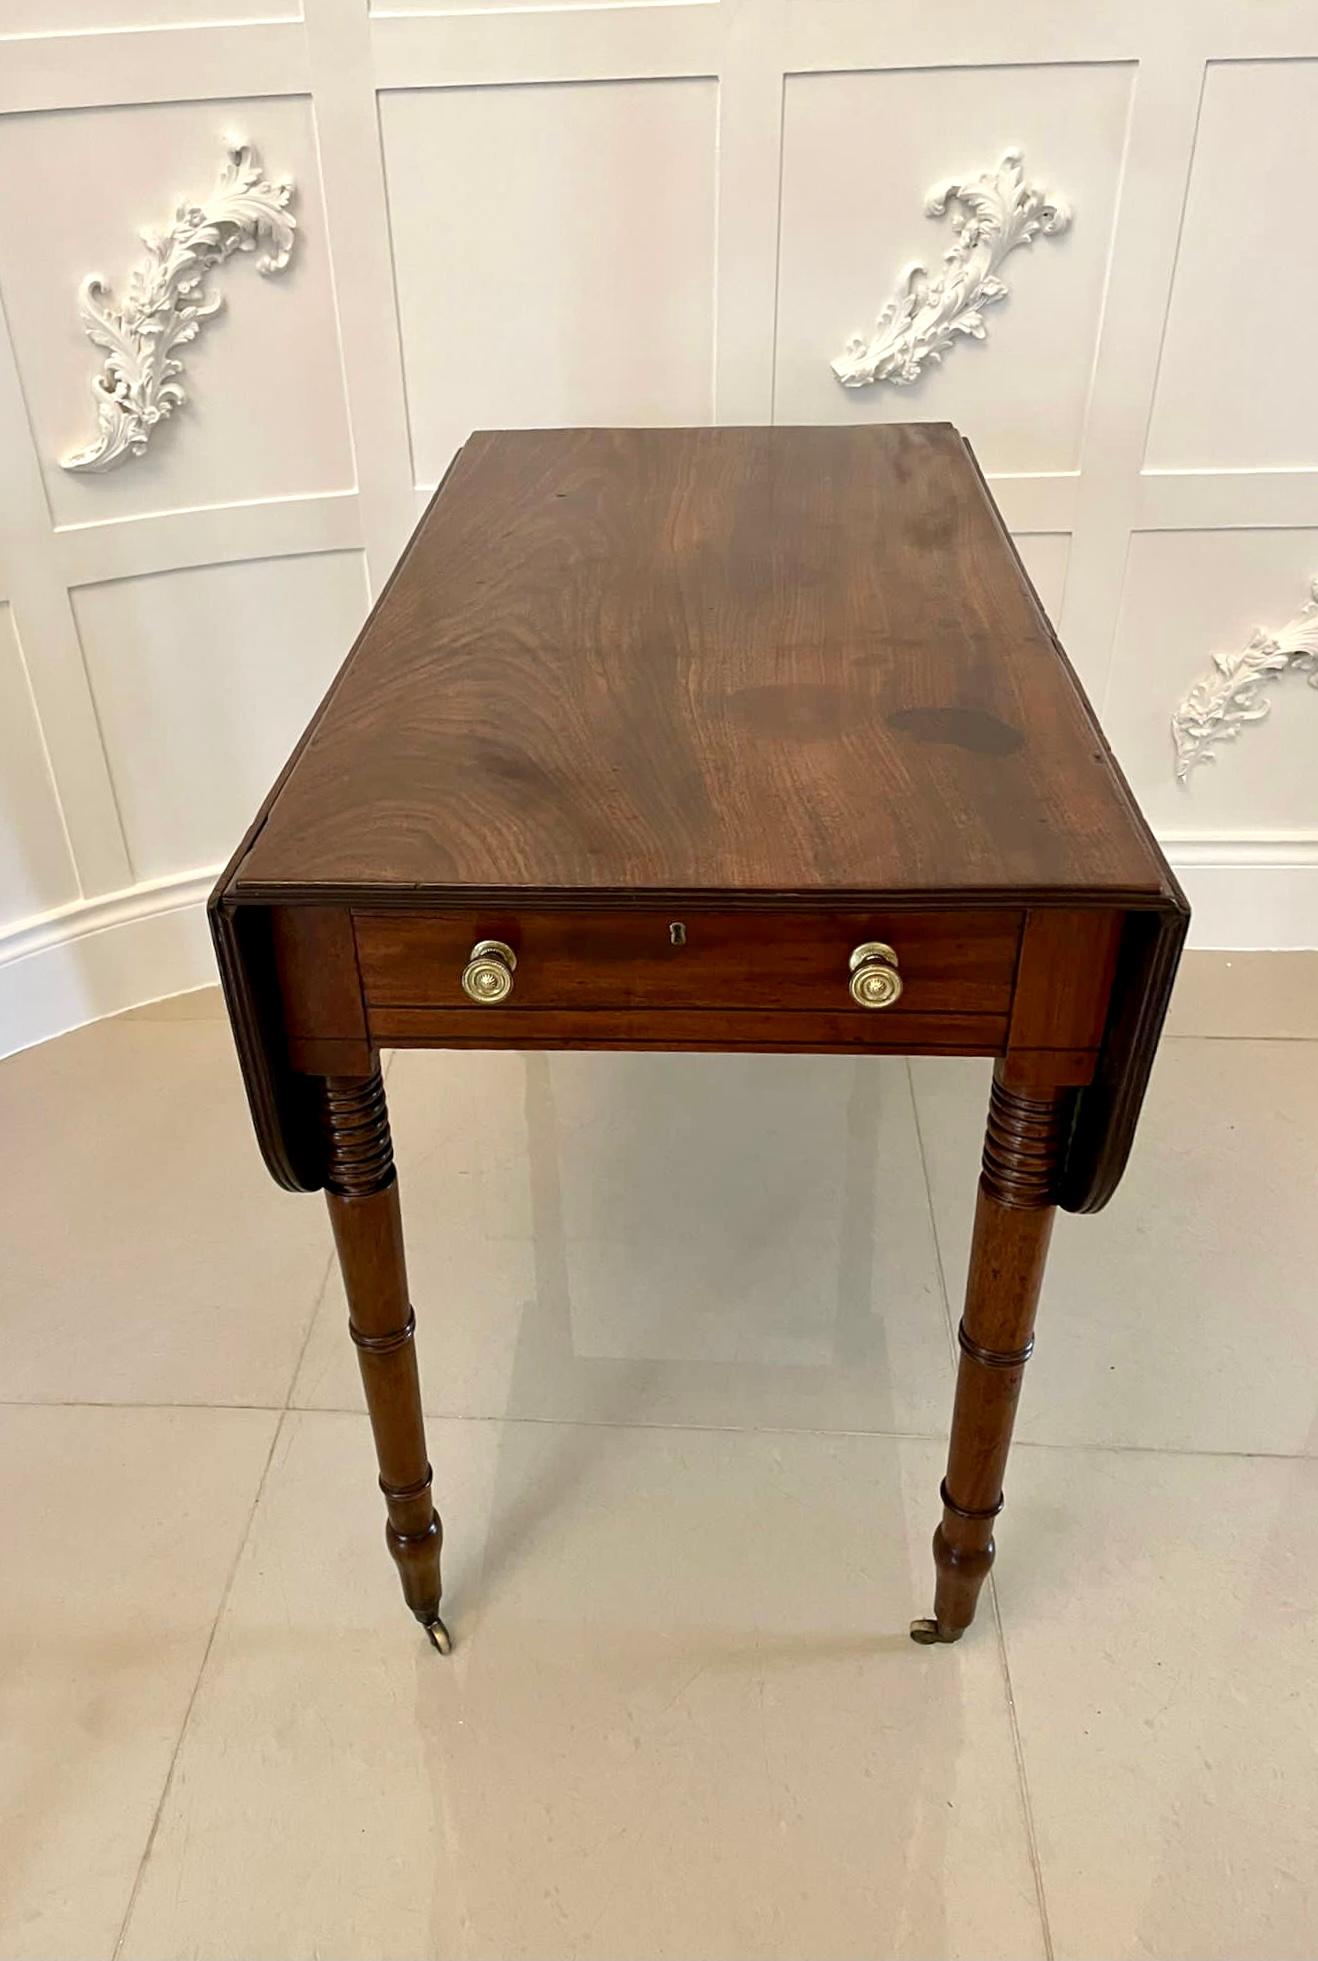 Antique George IIIl quality mahogany Pembroke table having a quality mahogany top with two drop leaves and a reeded edge, one long drawer standing on four elegant mahogany turned tapering legs with original castors 

In original untouched